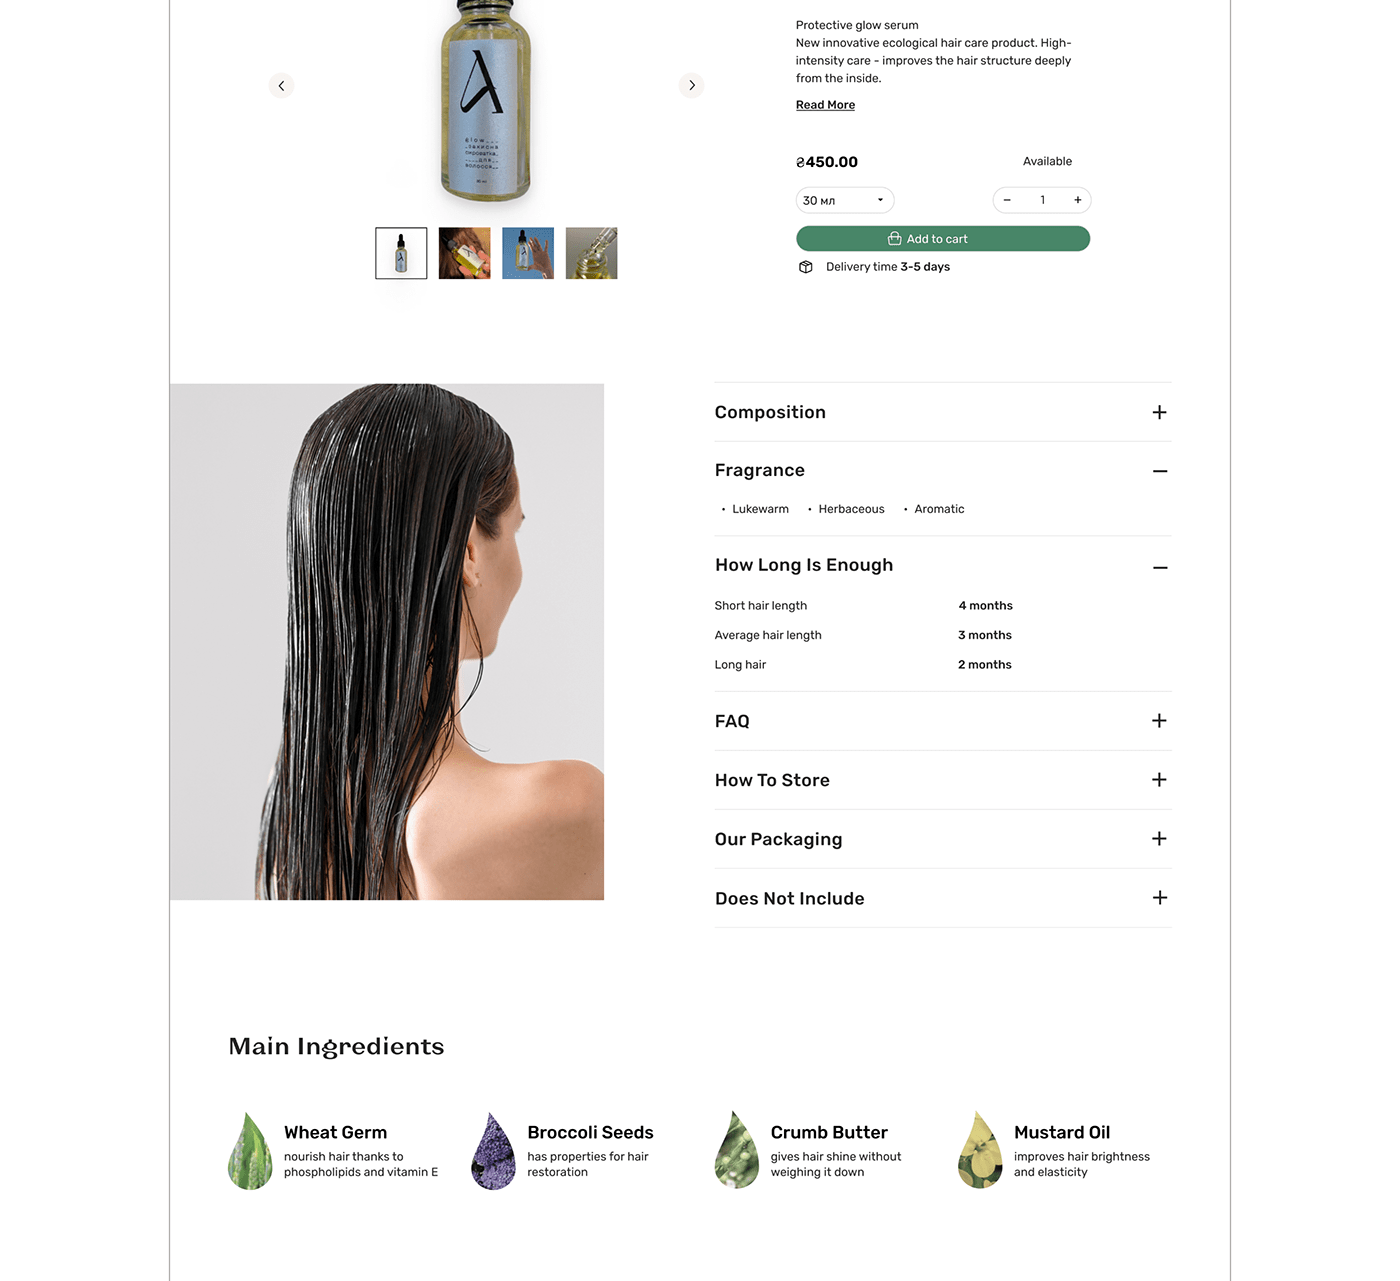 Ecommerce Website UI/UX cosmetics organic user interface user experience beauty Health natural